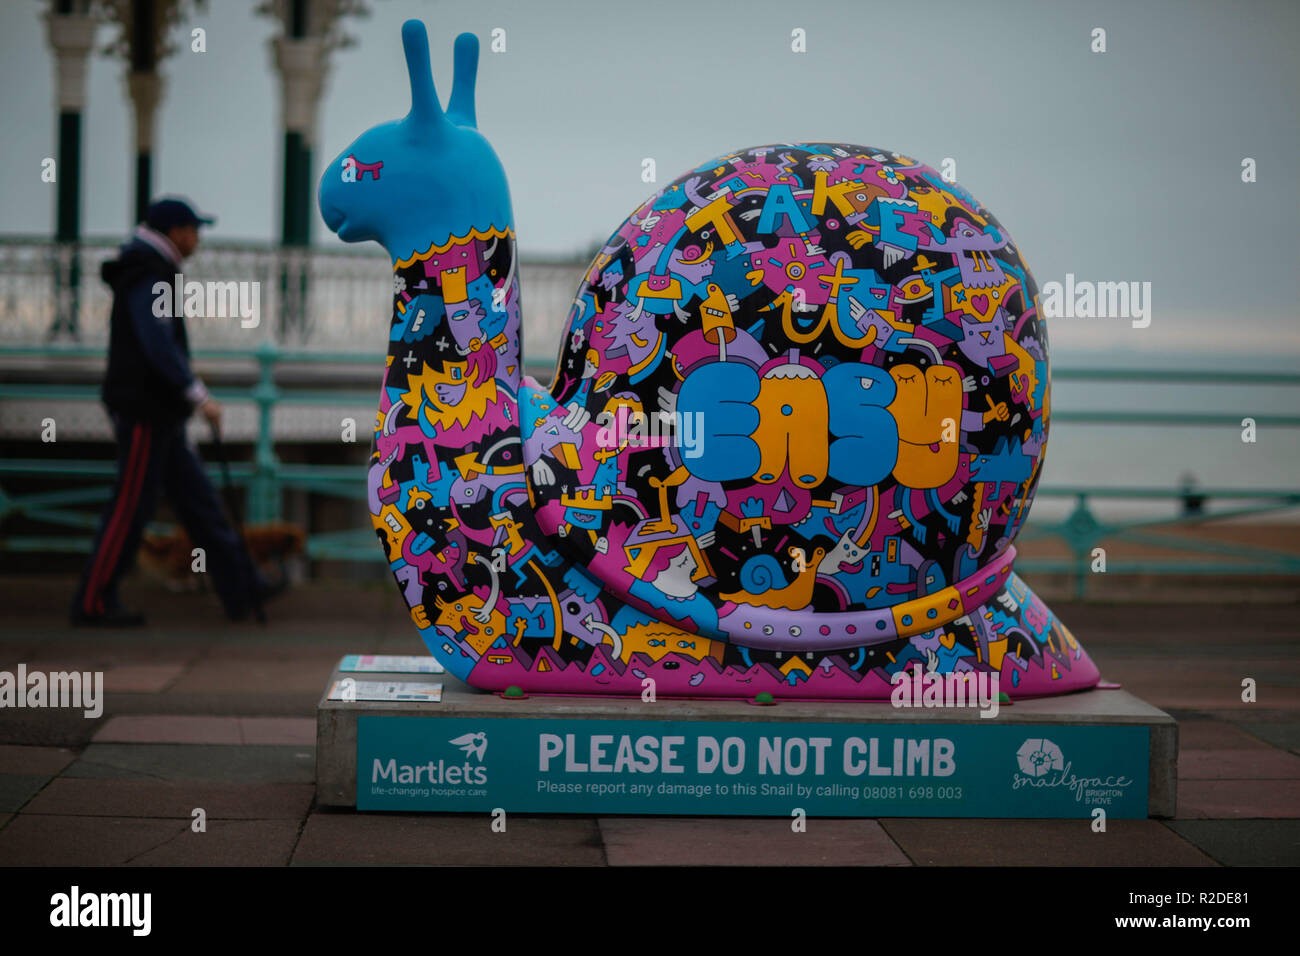 November 15, 2018 - Brighton and Hove are currently full of giant snails as part of a fundraising art trail to raise funds forthe Martlets Hospice. Fifty giant snail have been on display around Brighton and Hove September 15 until 18 November, with each giant snail sponsored by a local business and decorated by an artist as part of a city campaign to raise essential funds to support the Martlets Hospice. The trail, known as the Snailway, stretches between Brighton Marina and Hove Lagoon and up to Preston Park. A farewell Event will then bring them together and auction them to raise money for t Stock Photo